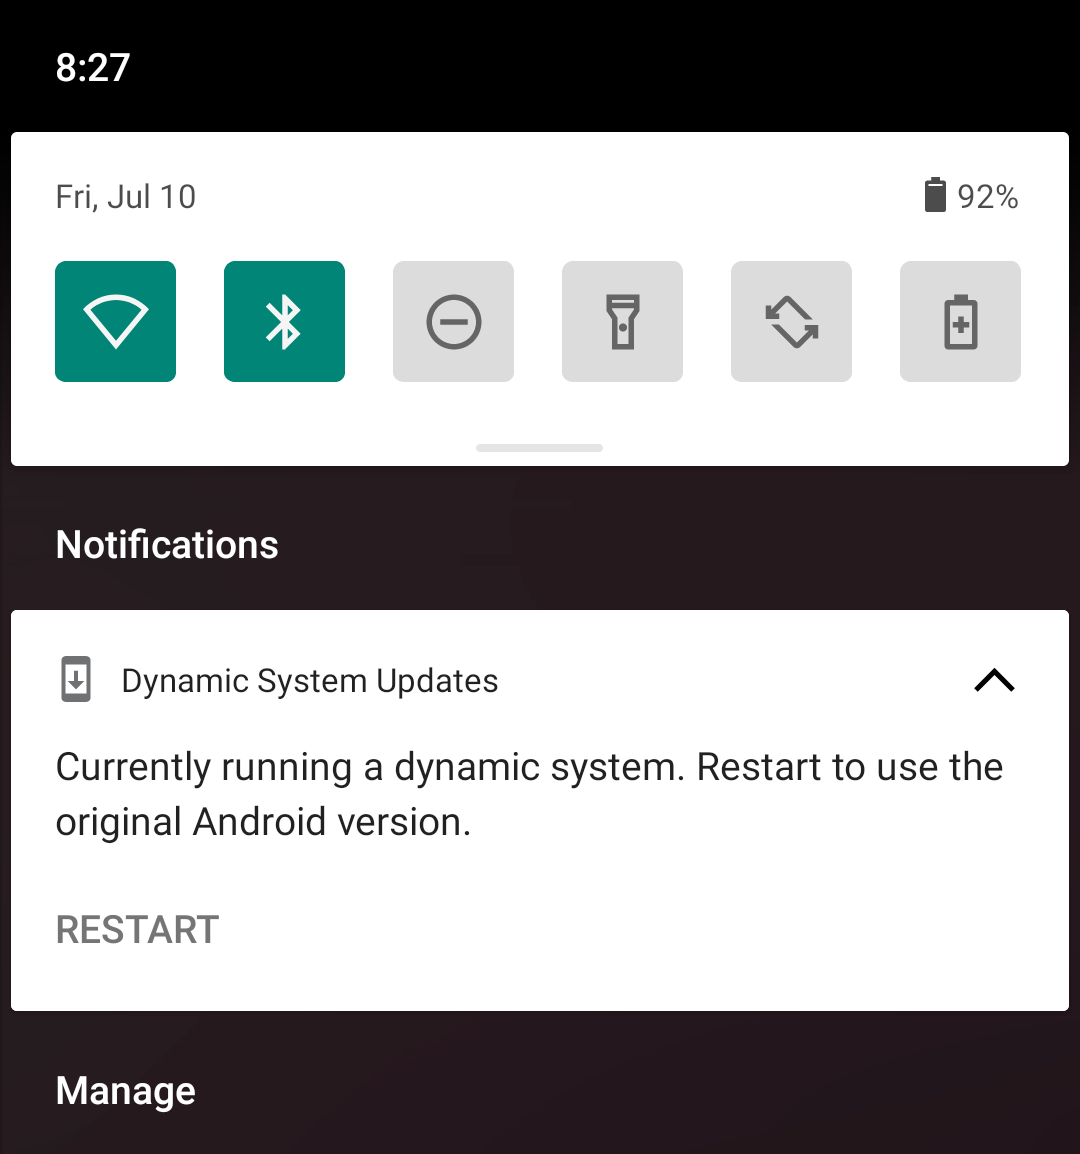 DSU notification with an option that lets you reboot the device using the
original system image